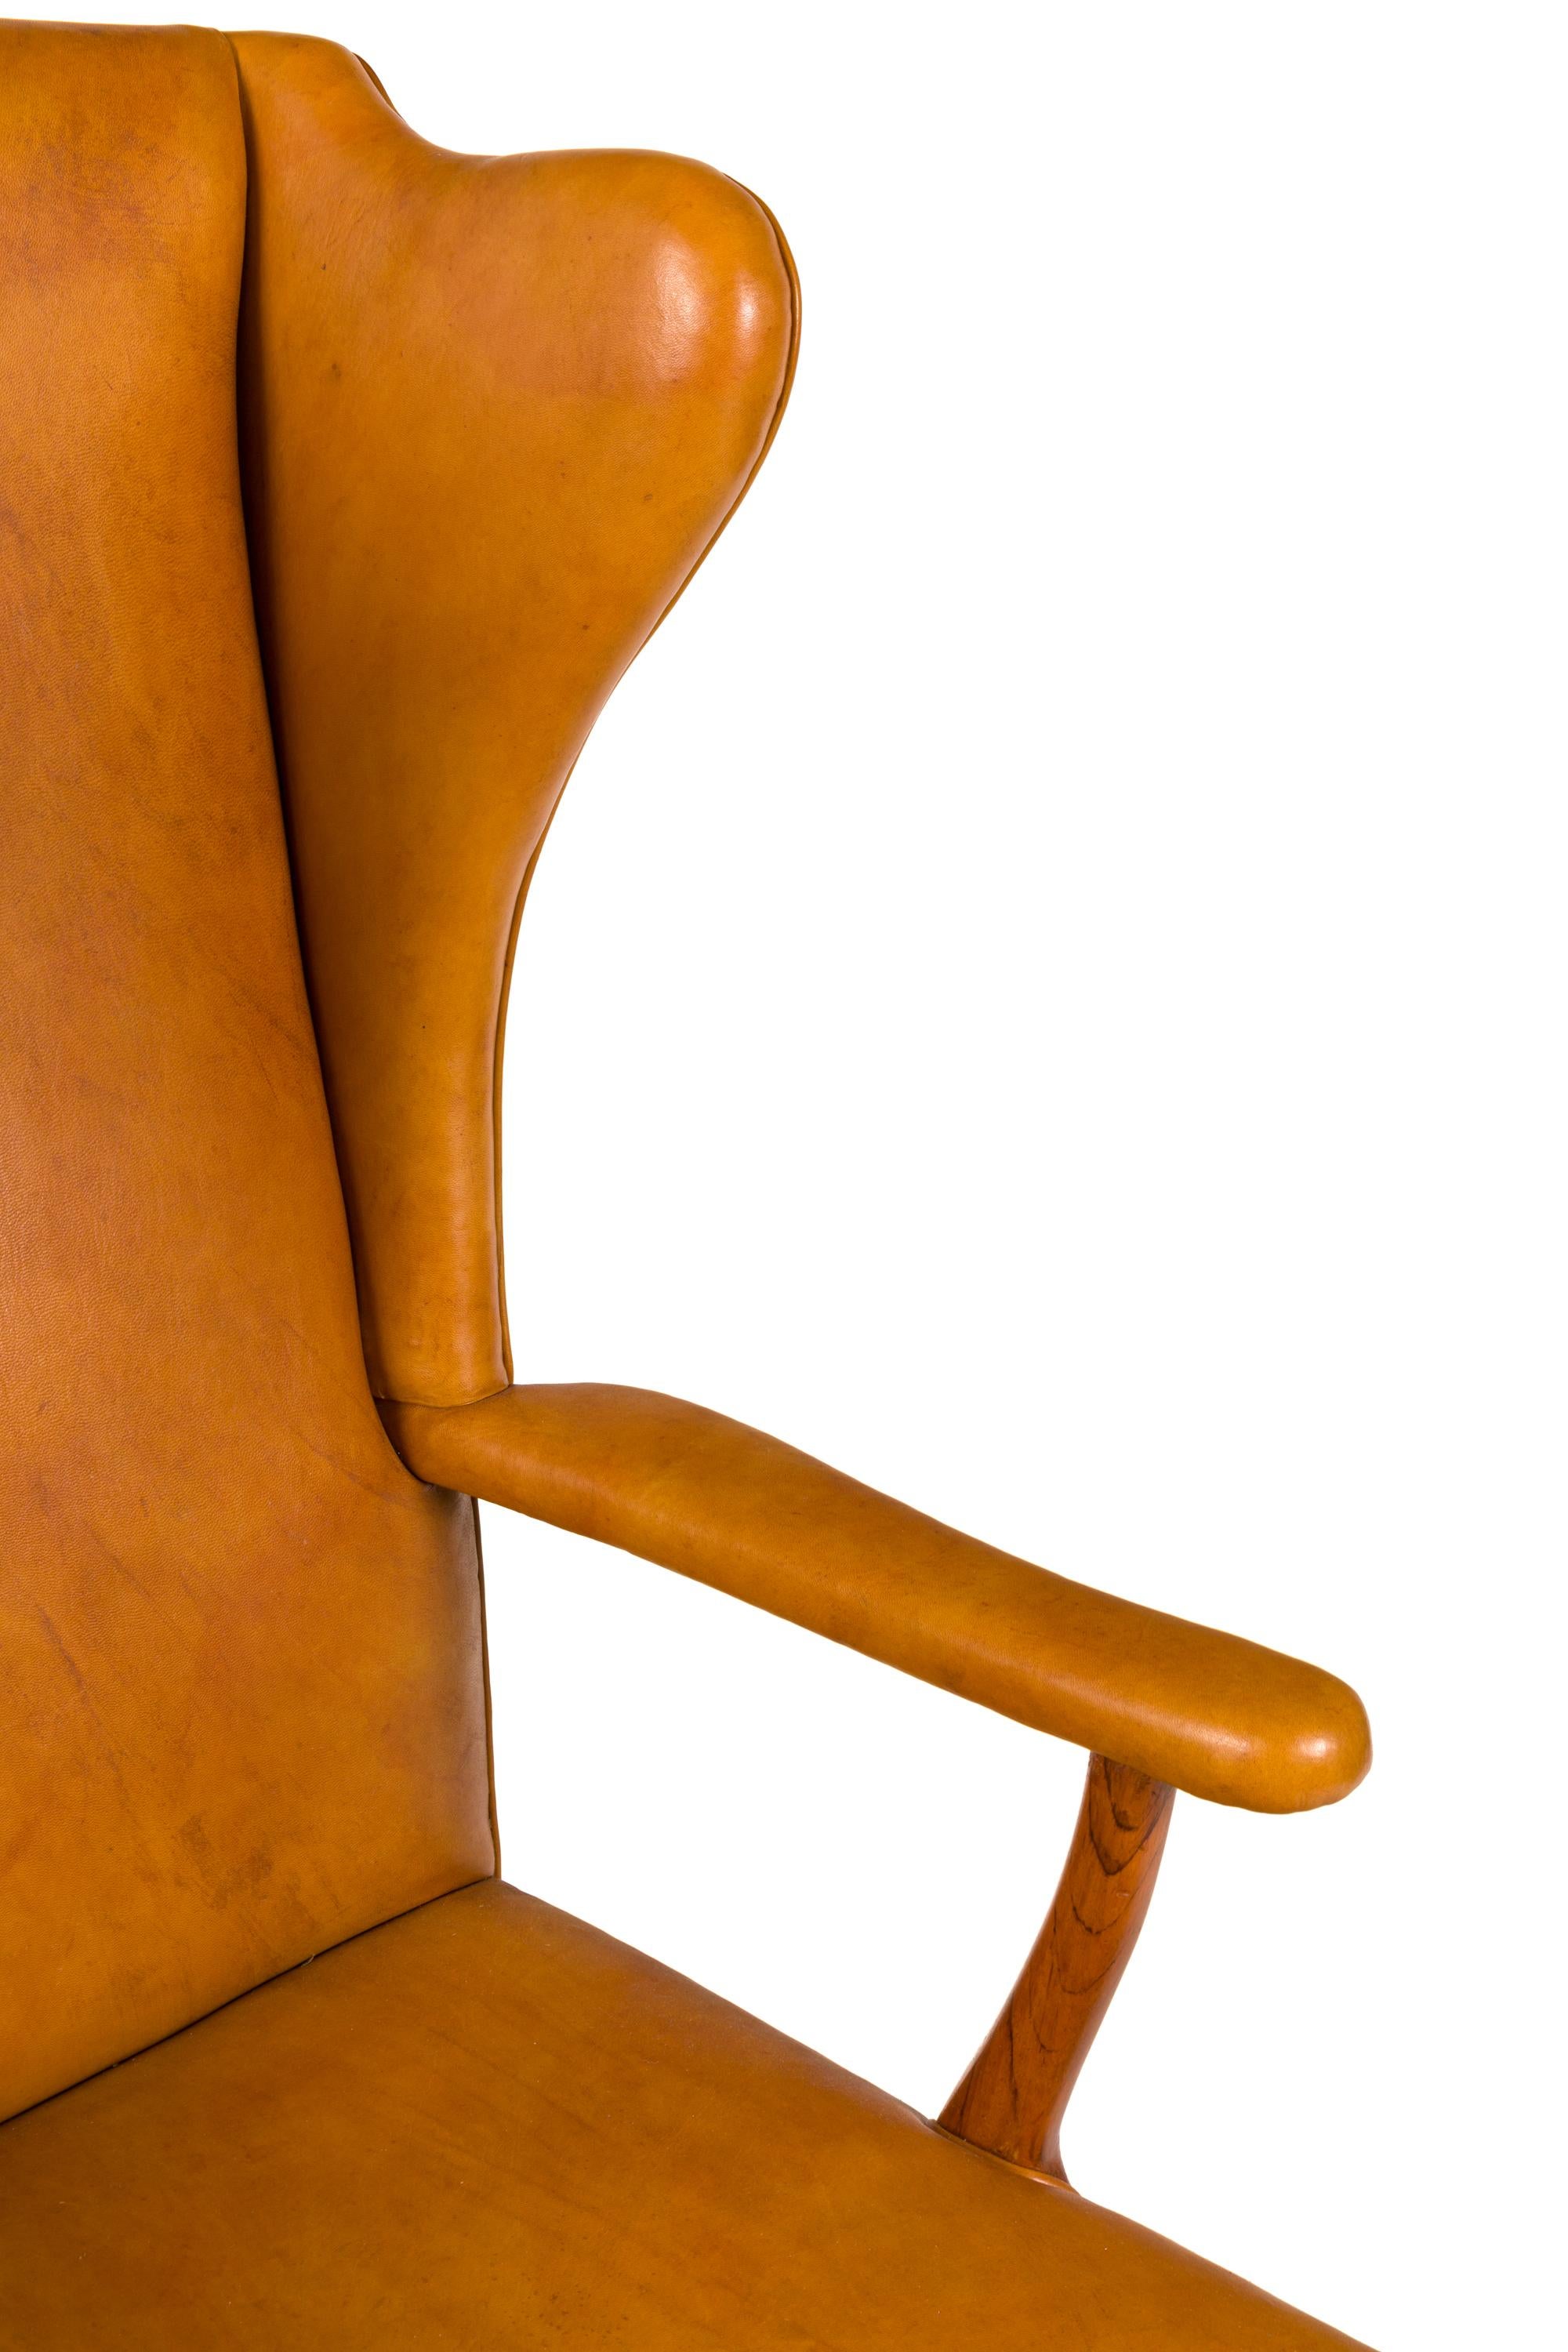 Borge Mogensen Vintage Leather High Back Arm Chair, Denmark 1947 In Good Condition In New York, NY